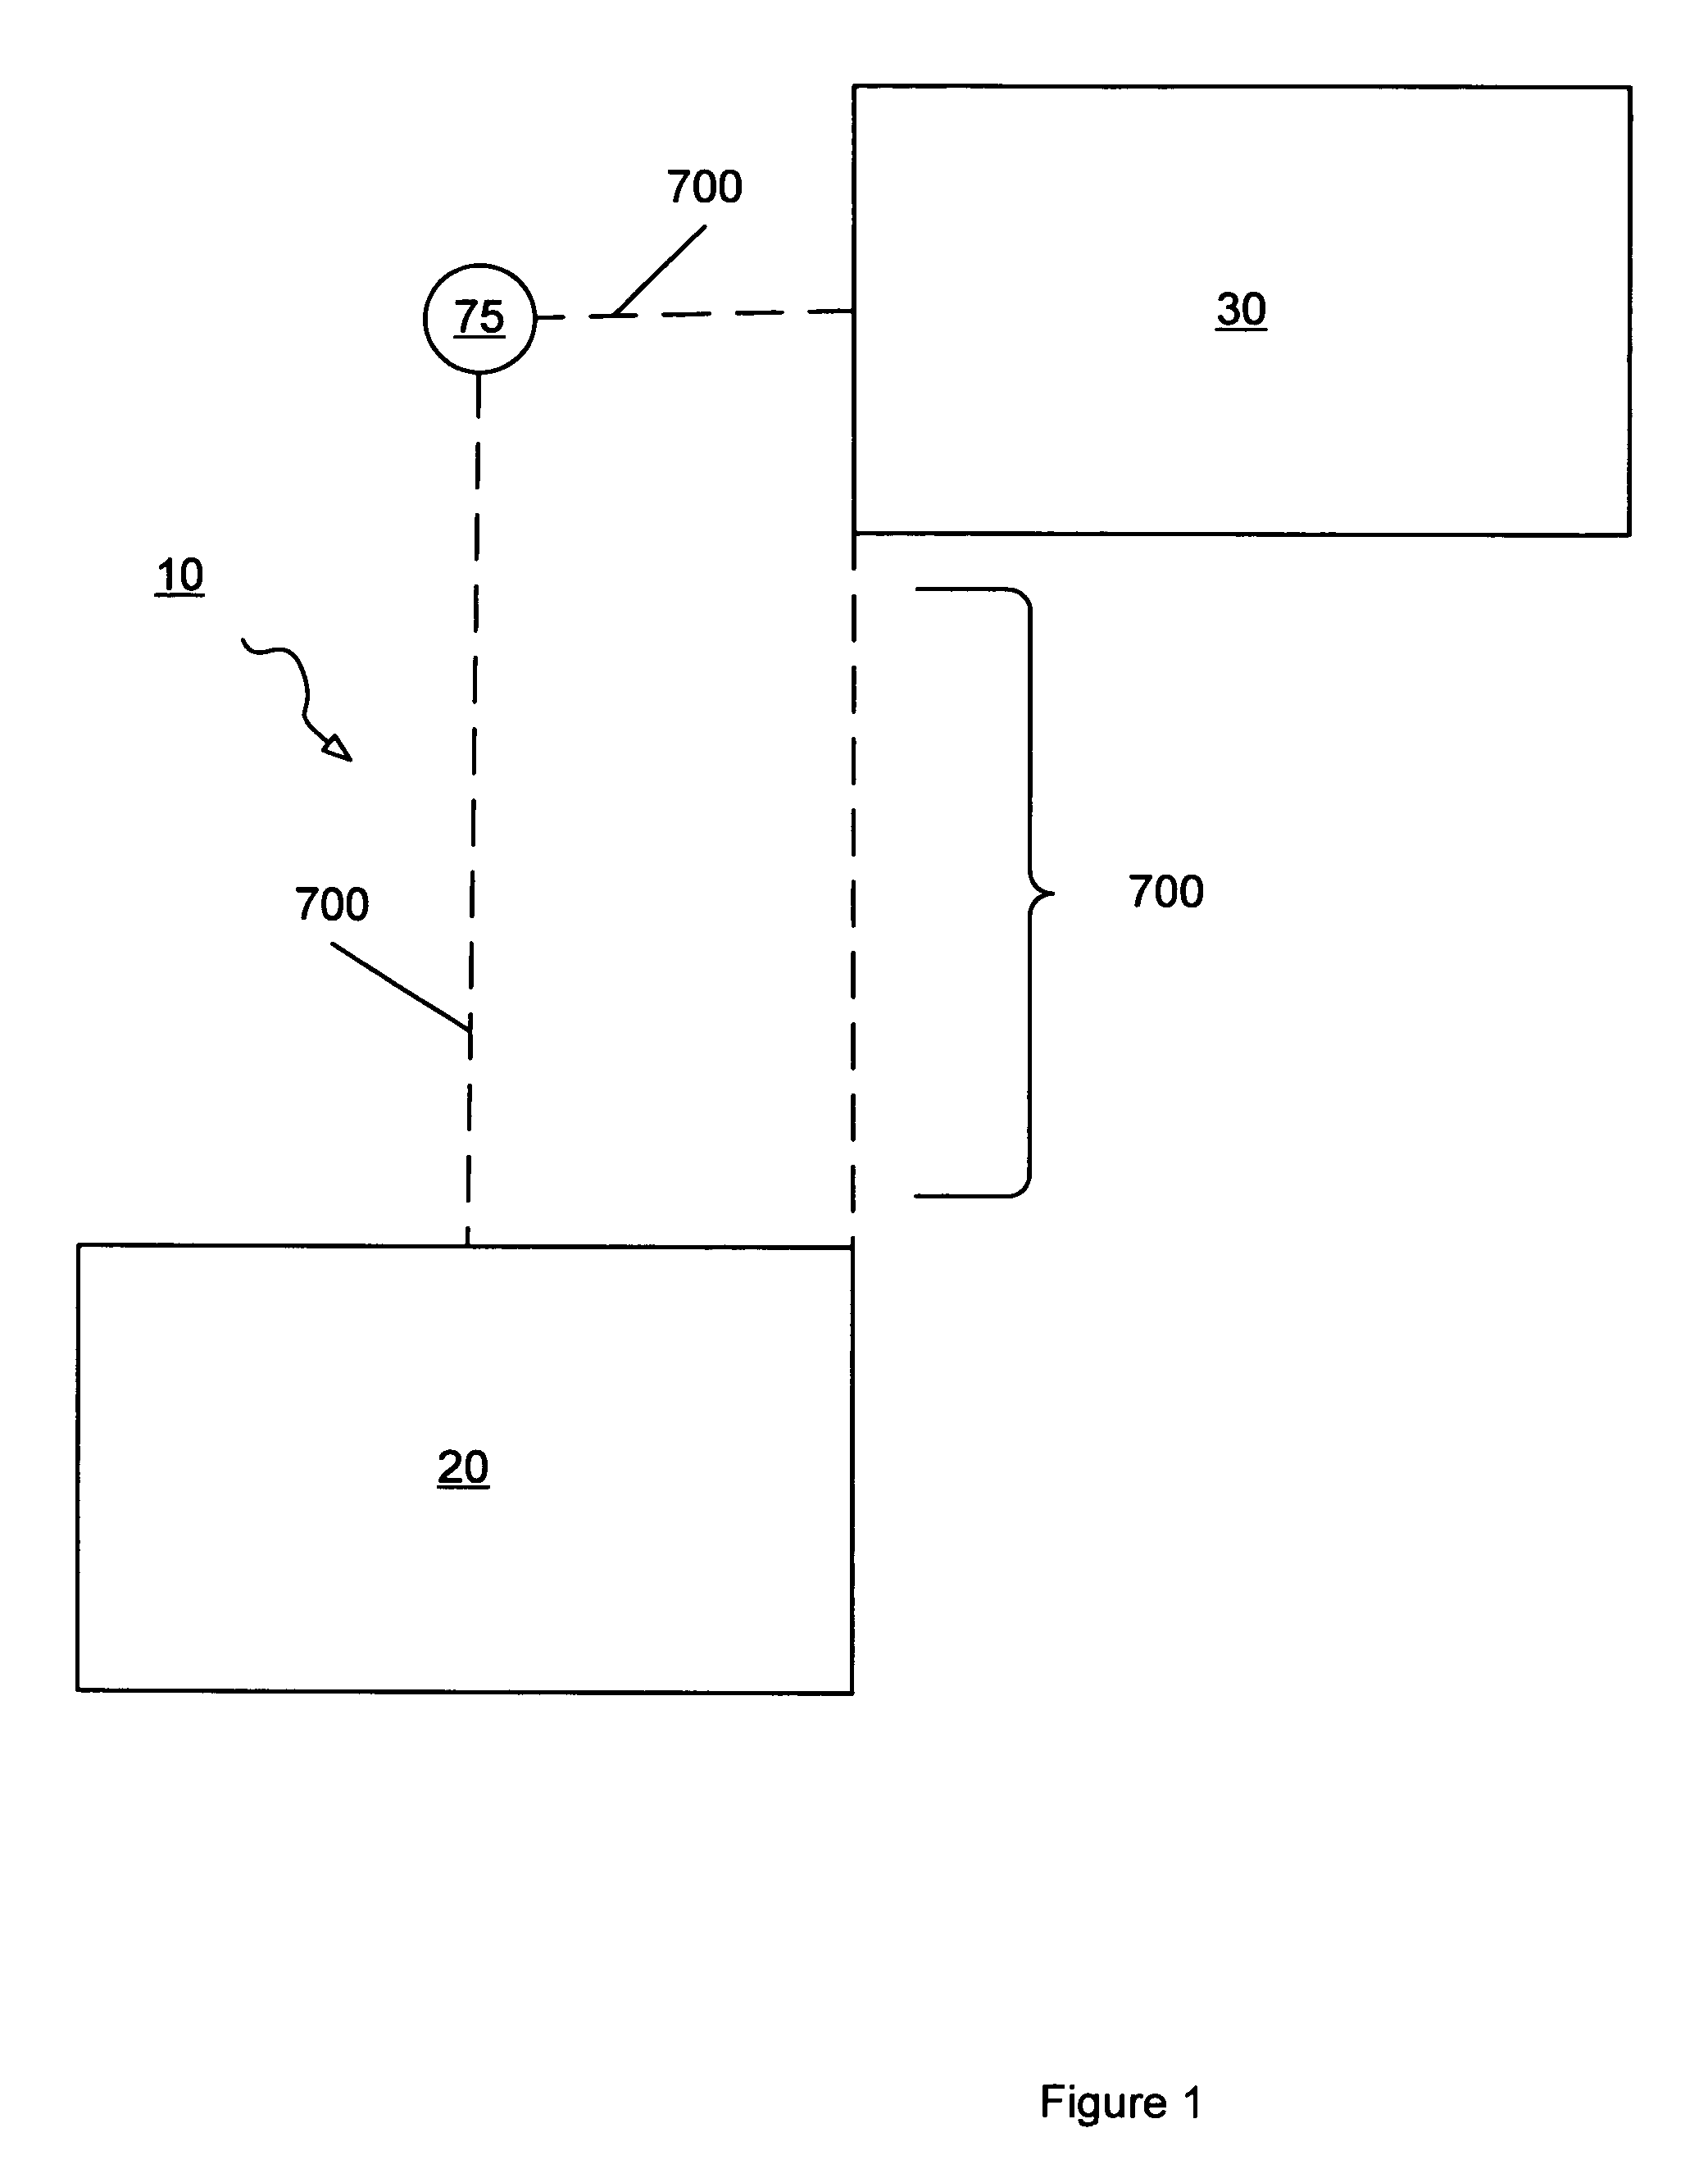 Entertainment paging system and method